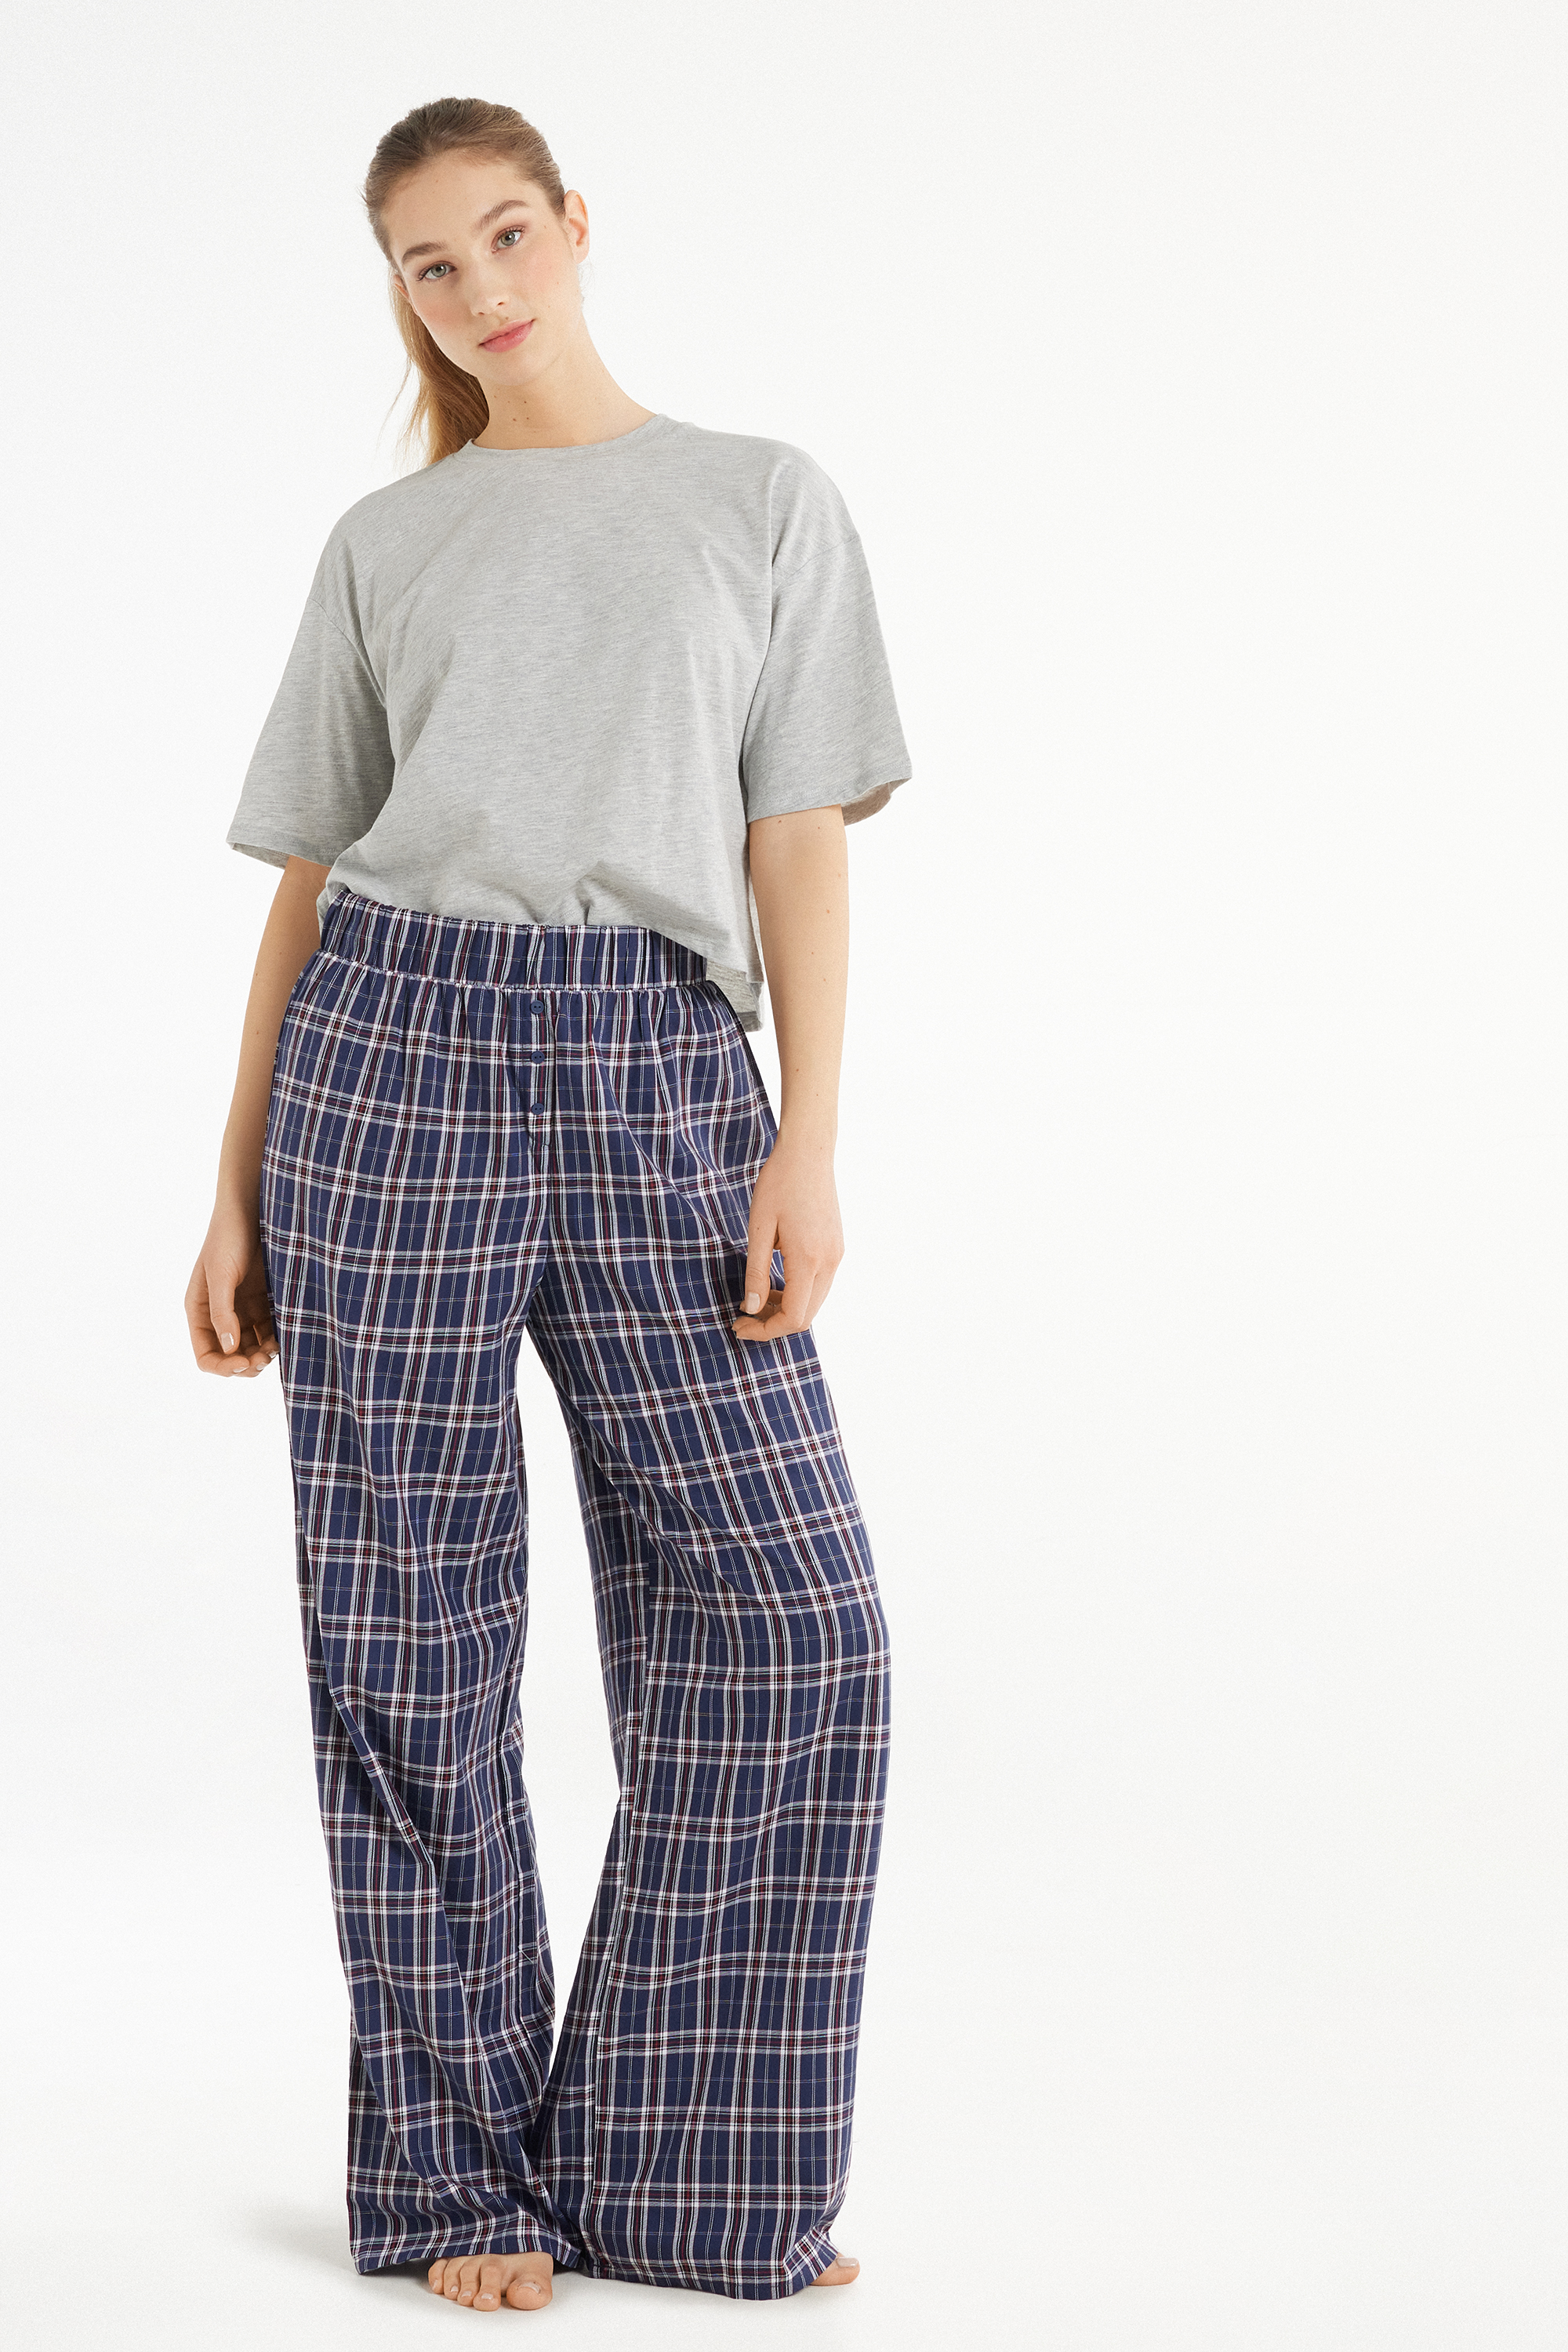 Short-Sleeved Pyjamas with Long Canvas Bottoms